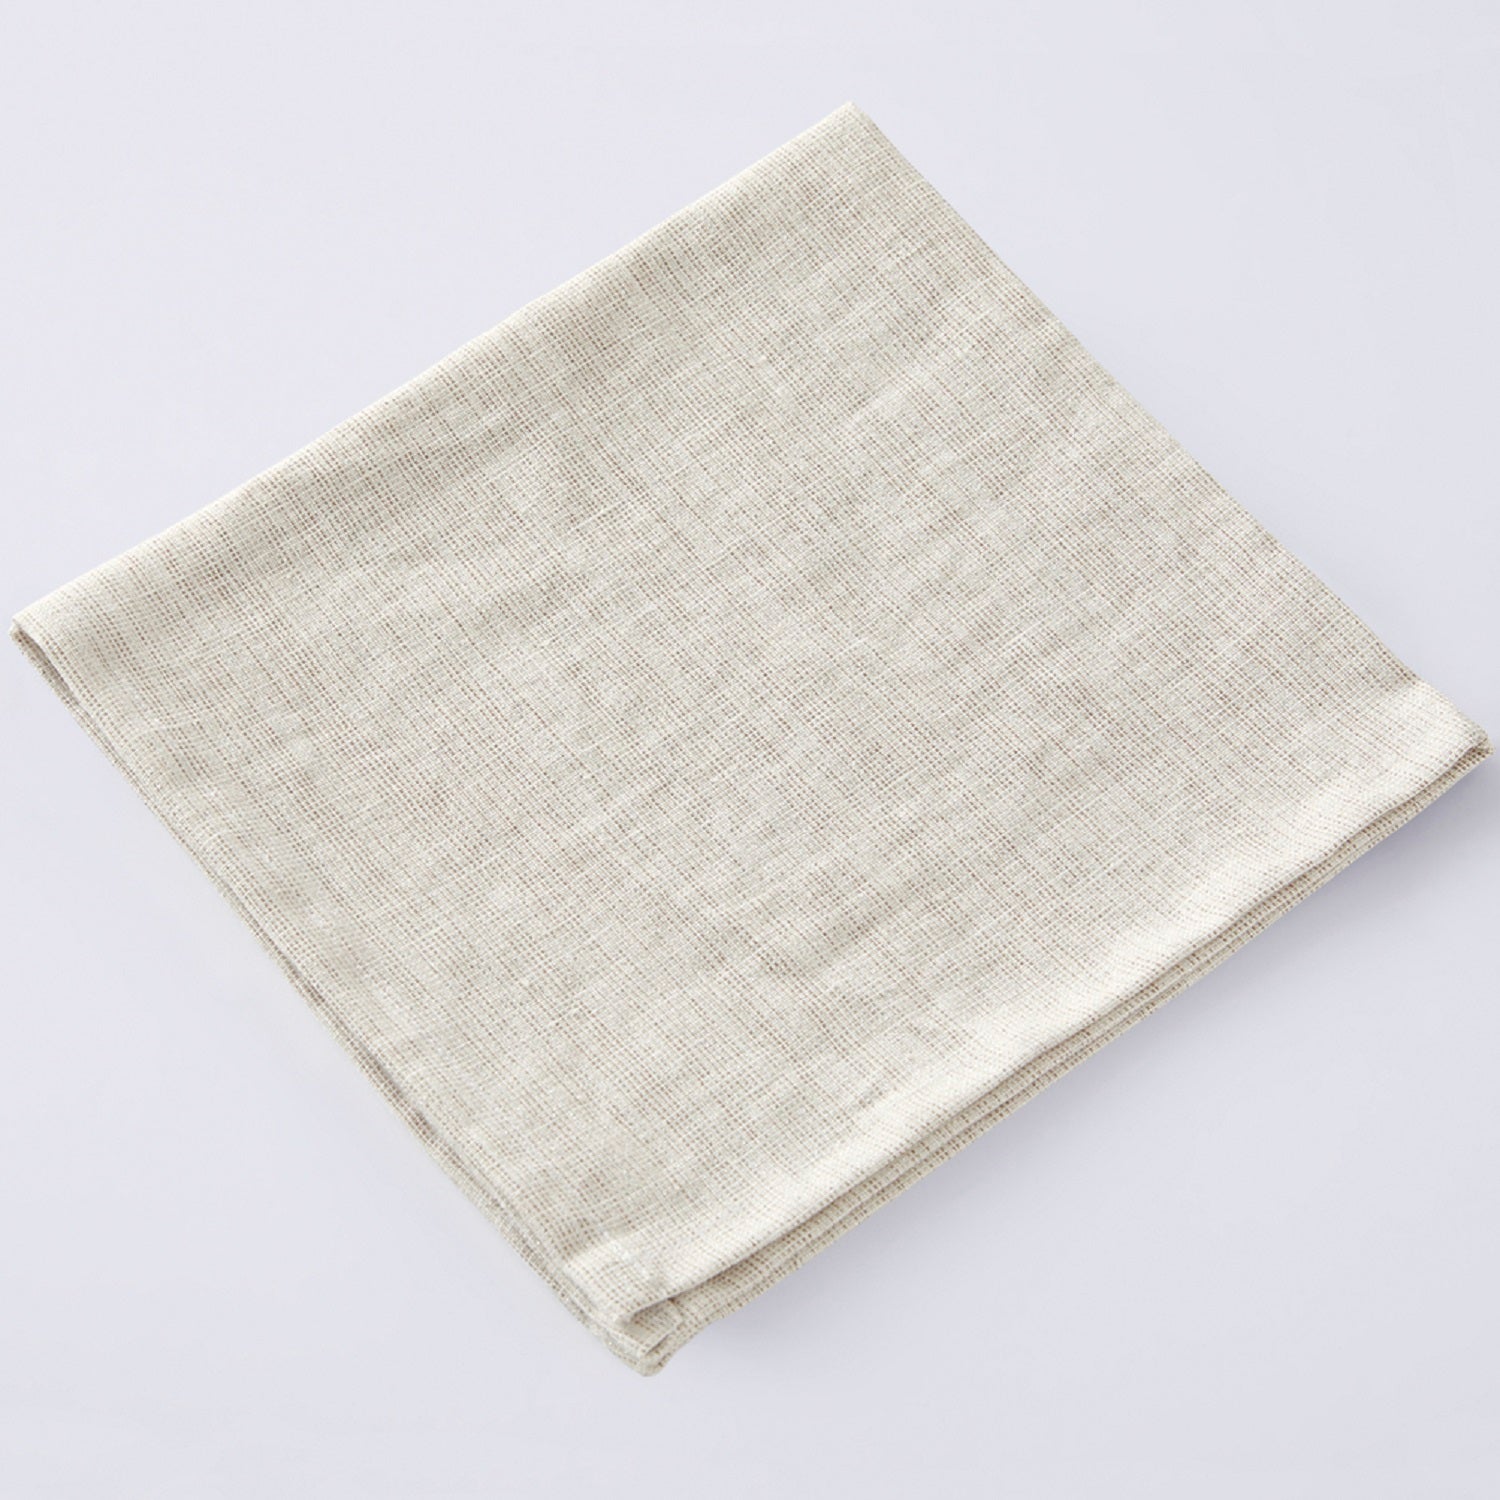 Charvet Editions "Sirius" (Gypse), Woven linen & mix sparkle tablecloth. Made in France.